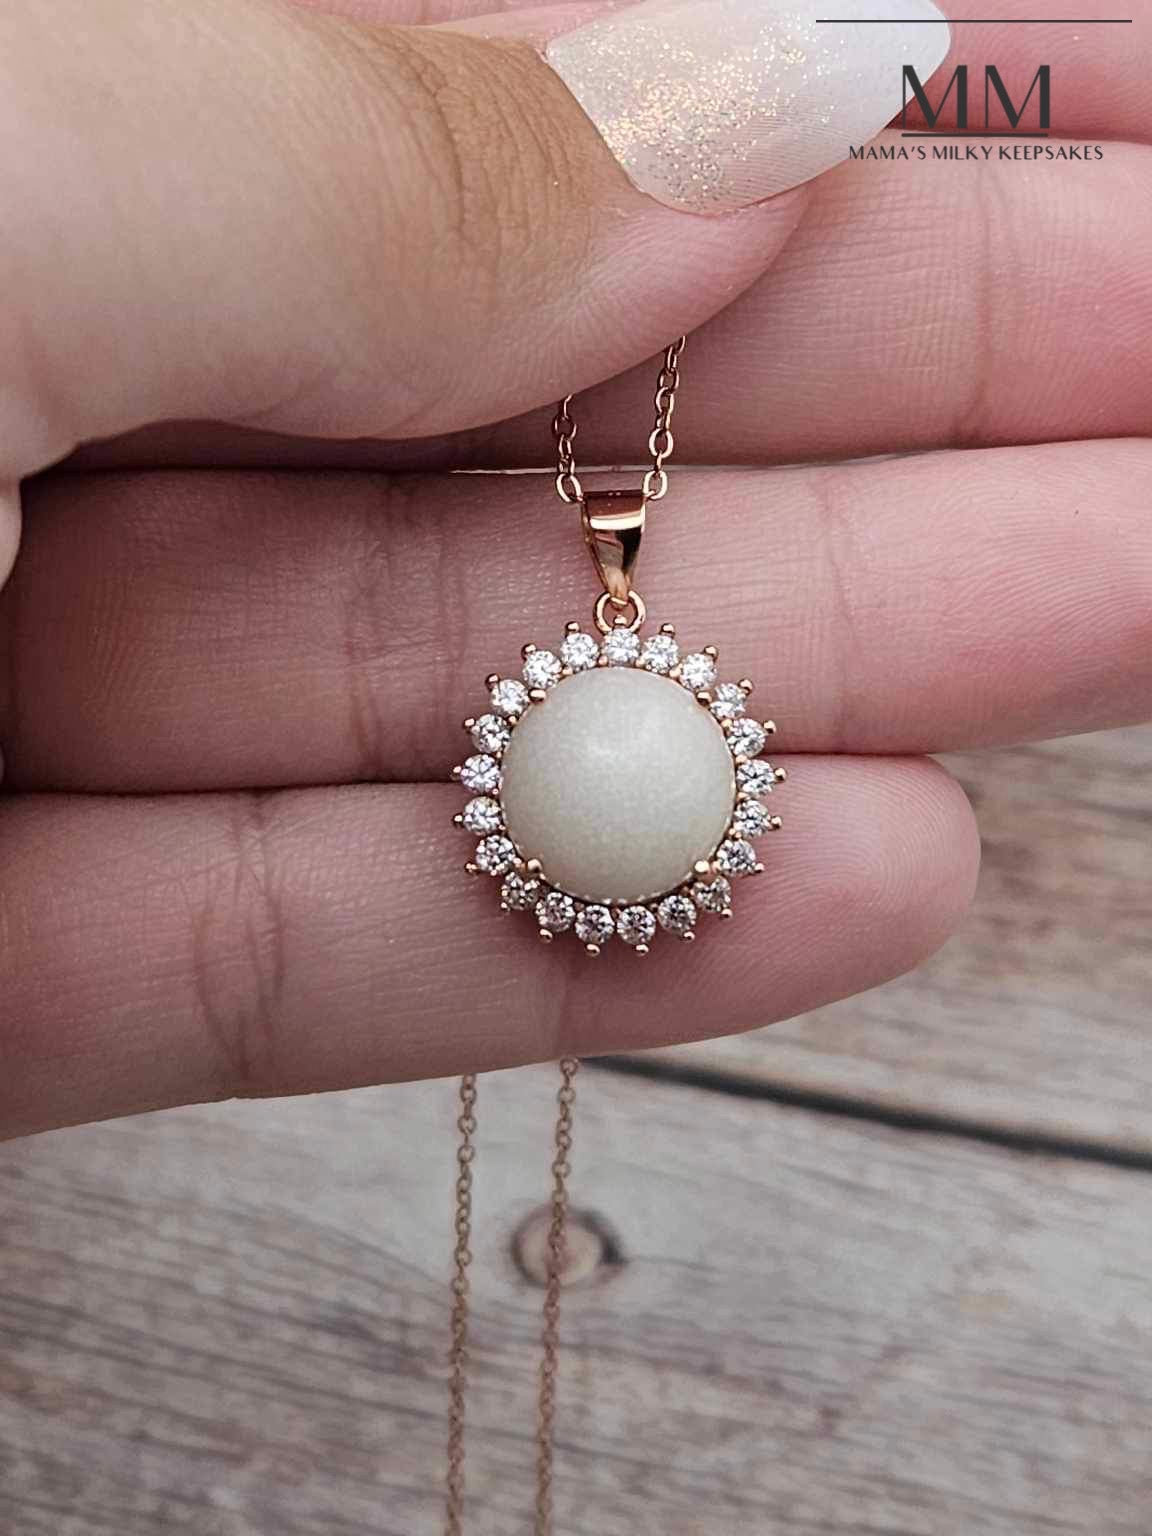 Breastmilk Round Necklace Pendant, Cremation Round Necklace Pendant, Keepsake Round Necklace Pendant, Sterling Silver Round Necklace Pendant, Hair Round Necklace Pendant, Ash Round Necklace Pendant, Umbilical Cord Round Necklace Pendant, BreastmilkJewelry Round Necklace Pendant